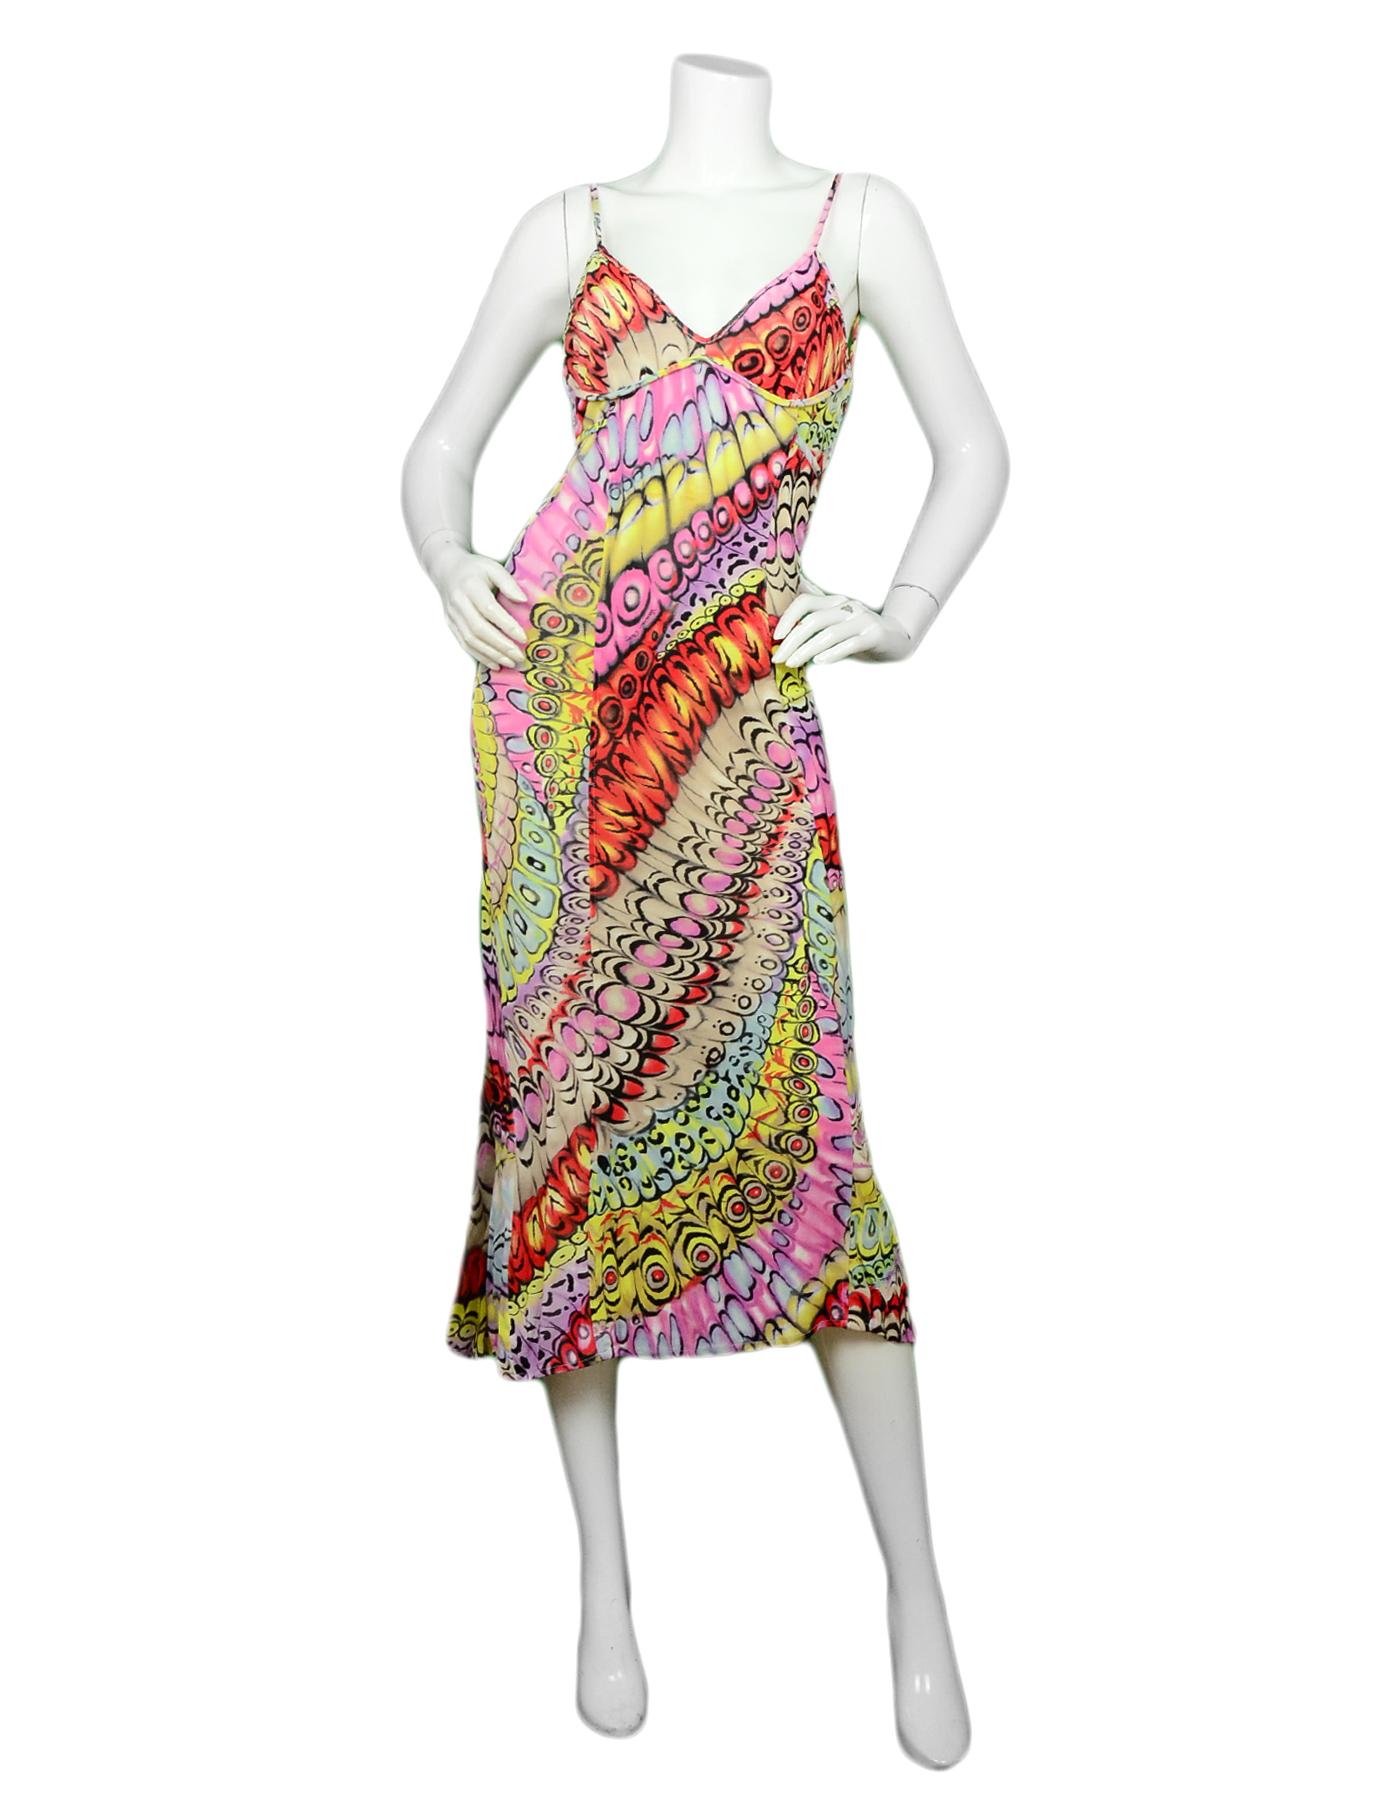 Versace Classic Multicolor Printed Spaghetti Strap Low Back Dress sz 44

Made In: Italy
Color: Red, pink, multicolor
Materials: 100% viscose
Opening/Closure: Side hidden zipper
Overall Condition: Very good pre-owned condition, with light wear to